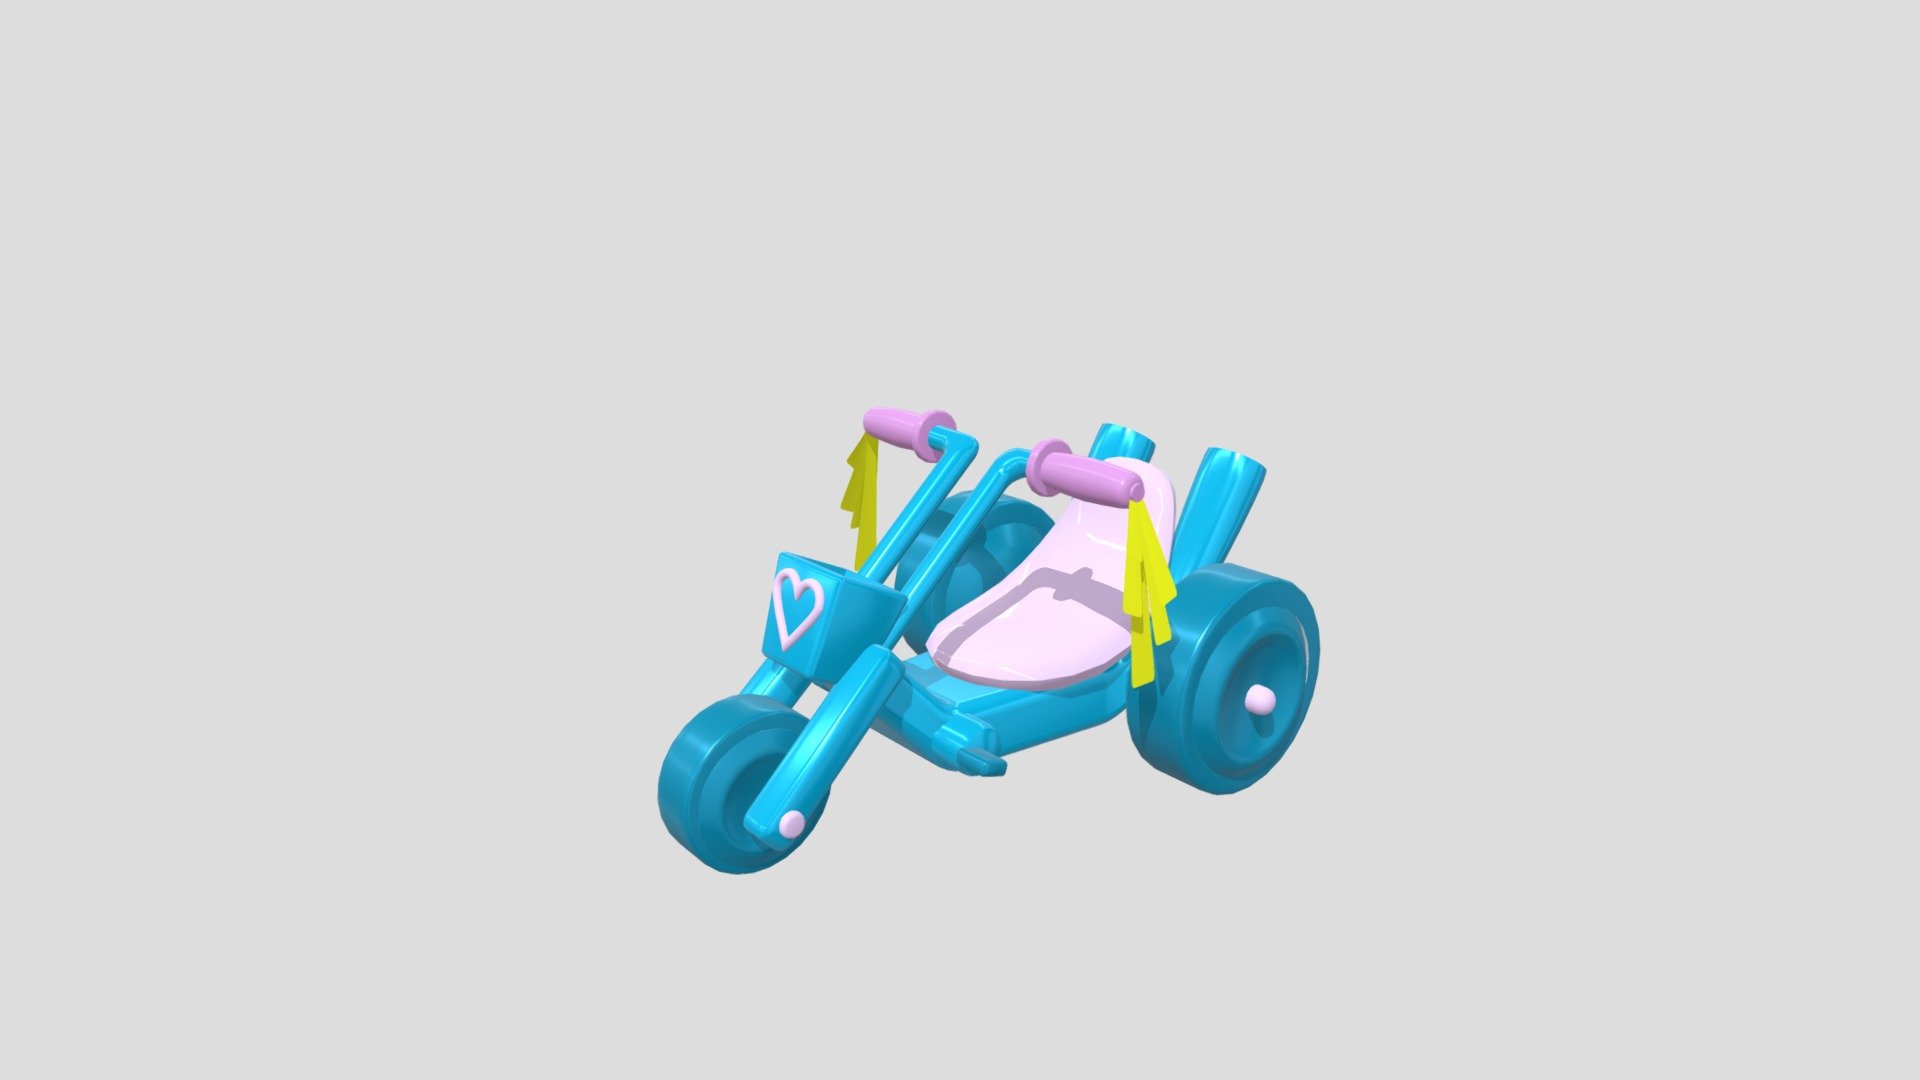 I was inspired by cute but badass characters in videogames. Like Mario Kart where characters like Peach have cool personalised vehicles 3d model